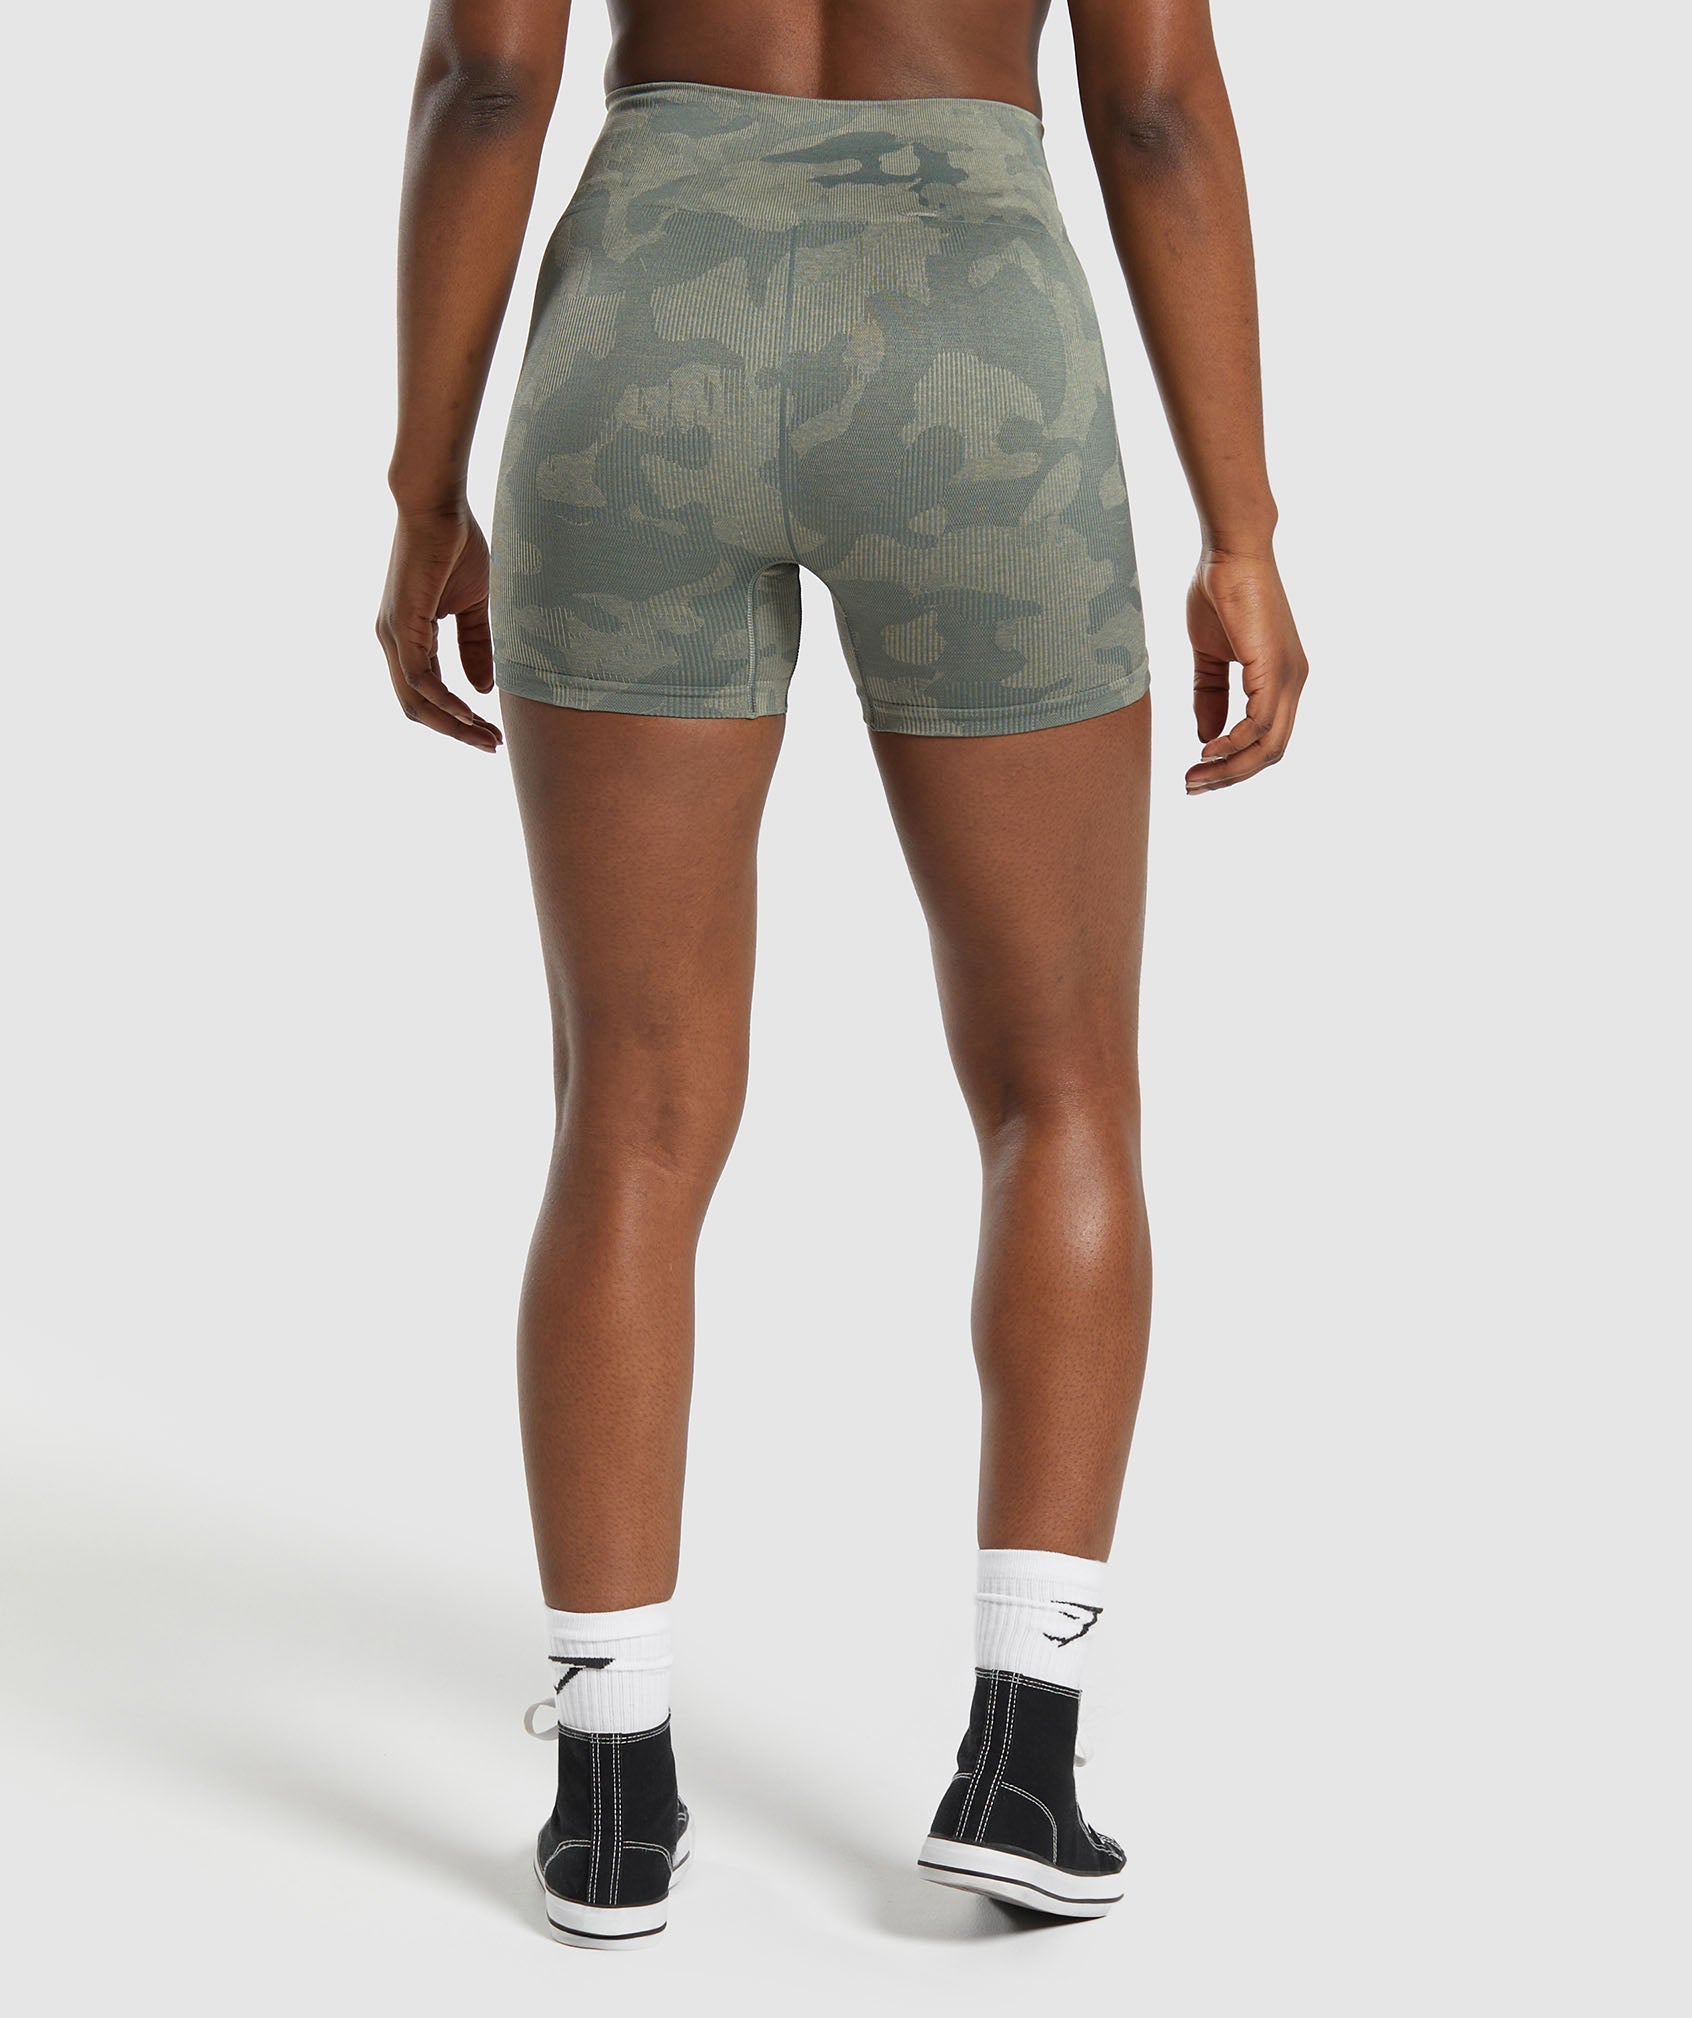 Adapt Camo Seamless Shorts in Unit Green/Chalk Green - view 2